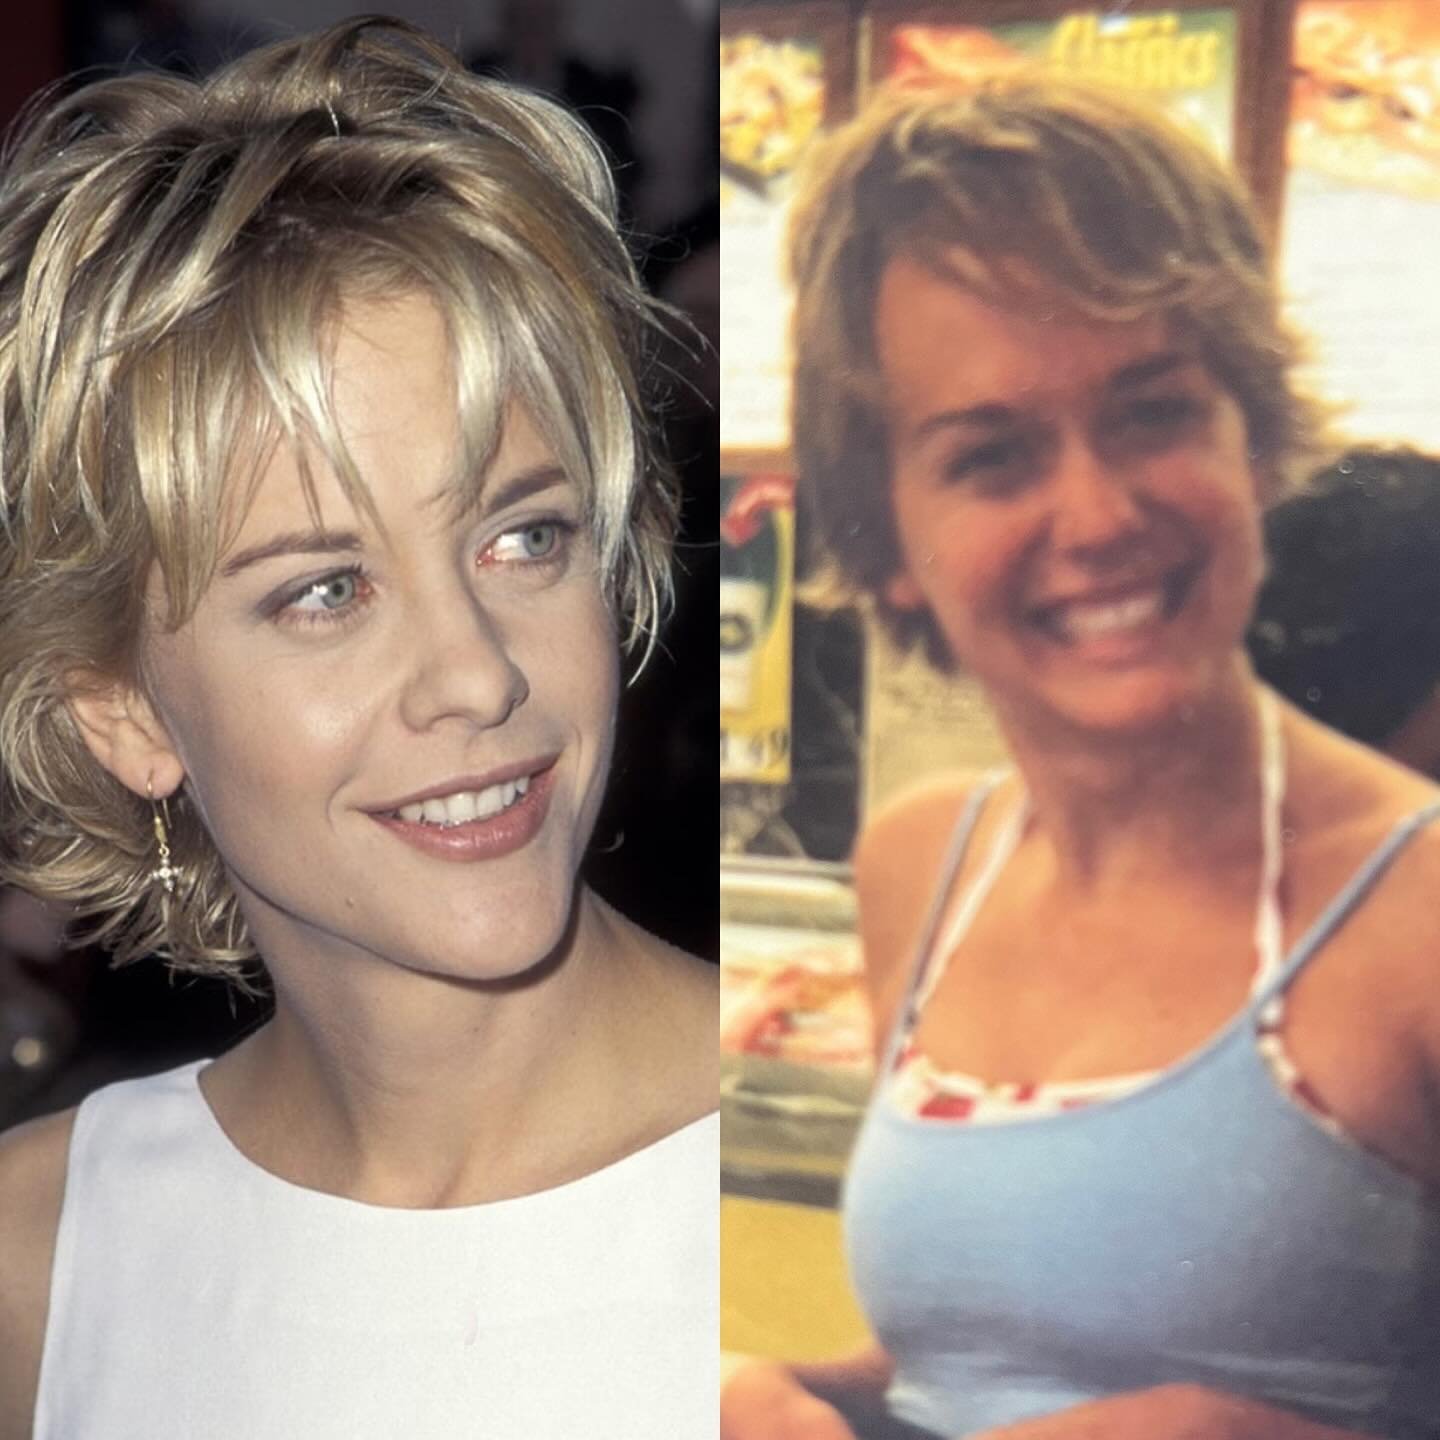 If you would have told 16-yr-old Sally w the Meg Ryan haircut that one day Meg Ryan would read and like and AND BLURB a novel SHE WROTE, she wouldn&rsquo;t dare believe you. (This is the same 16-yr-old who met a car manual writer on Career Day bc no 